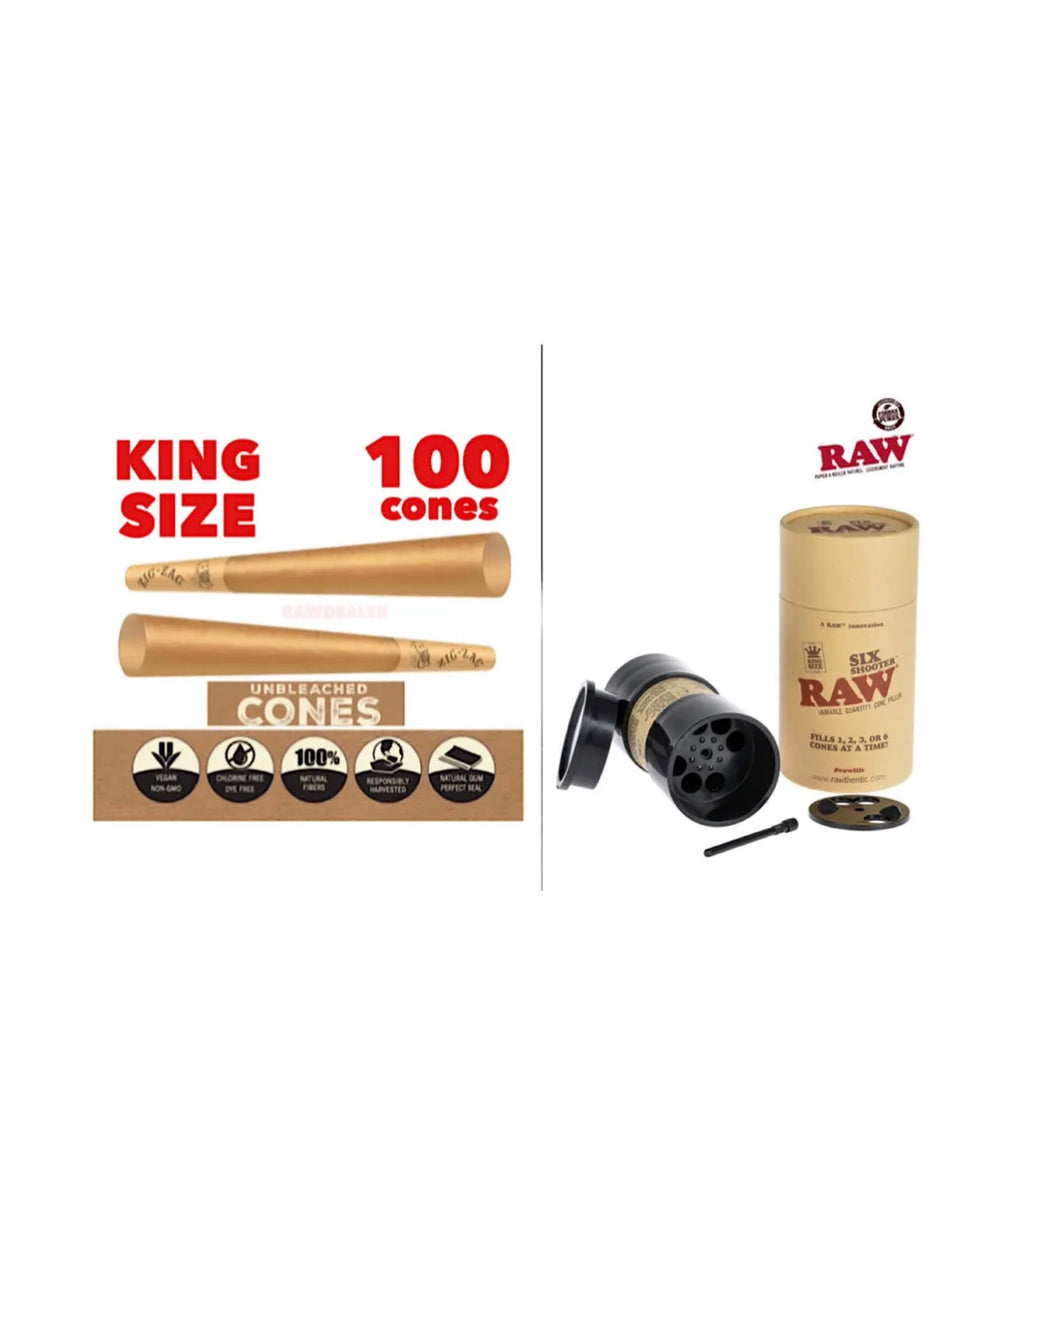 Zig Zag king size Unbleached Cone(100PK)+raw king size cone 6 six Shooter filler